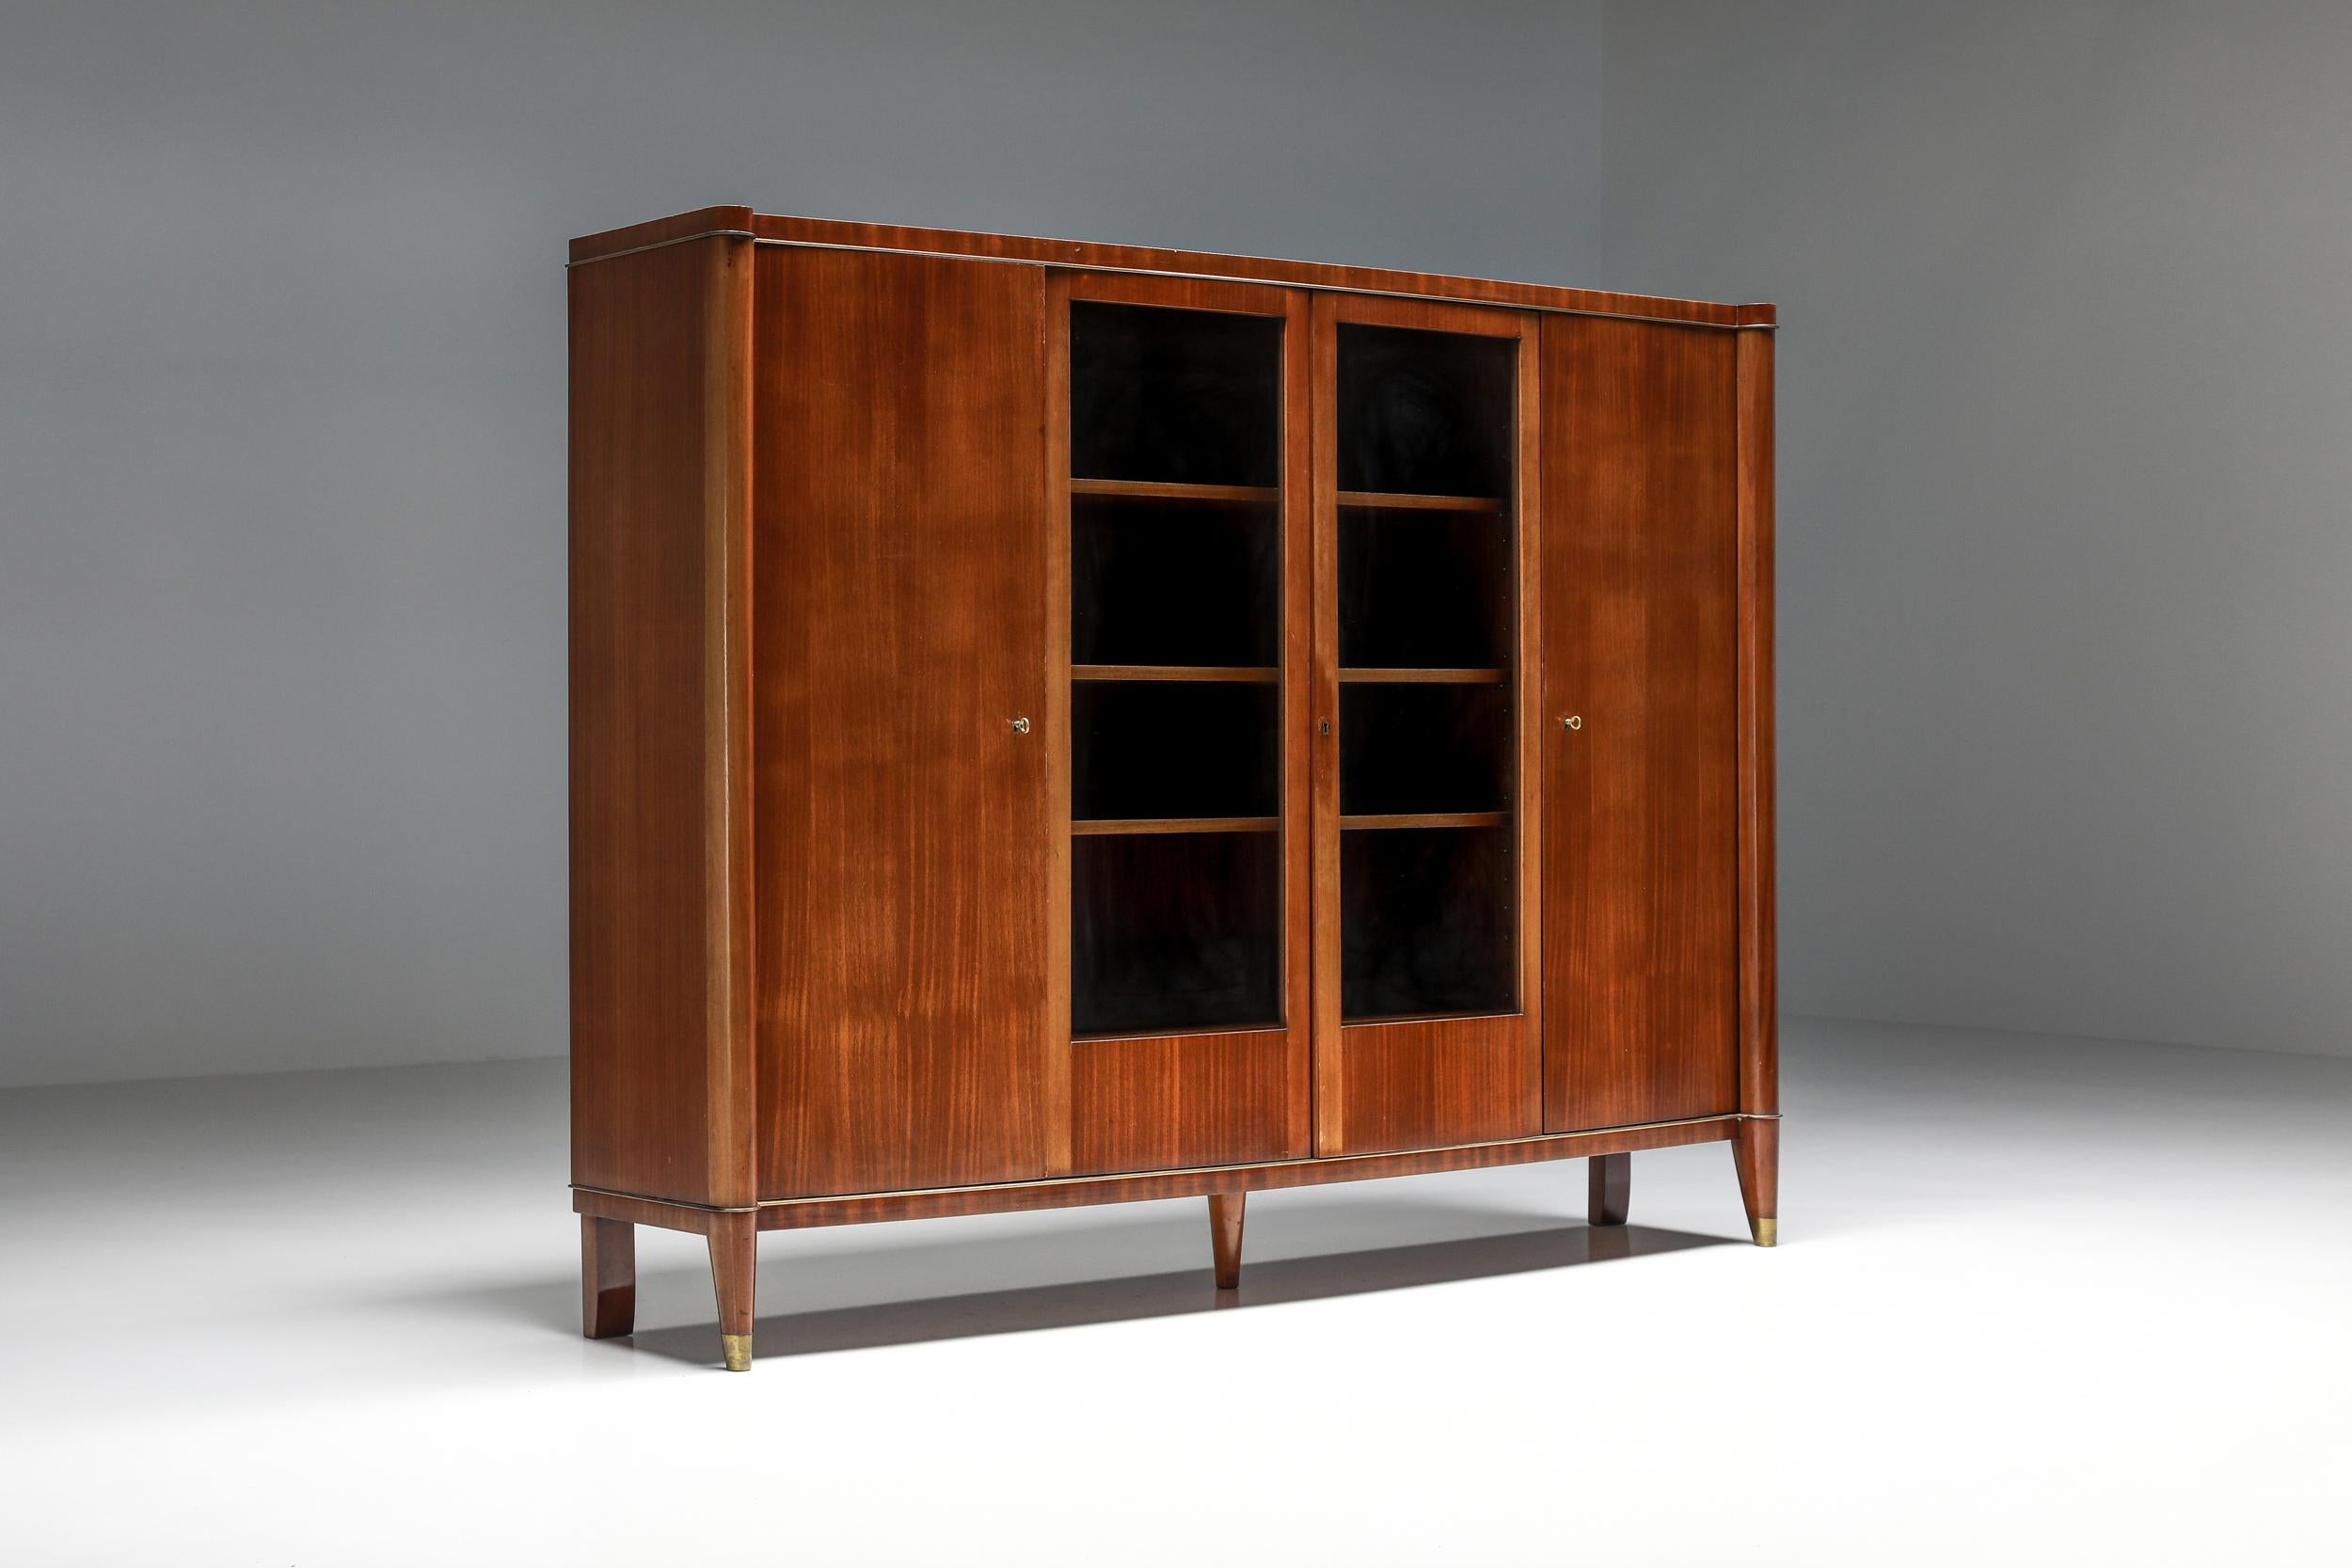 Exquisite 1920s Art Deco De Coene Voltaire bibliothèque or cabinet, a rare gem straight from the heart of France's design heritage. Crafted with a meticulous blend of wood, this stately piece features twelve generous shelves that beckon to showcase